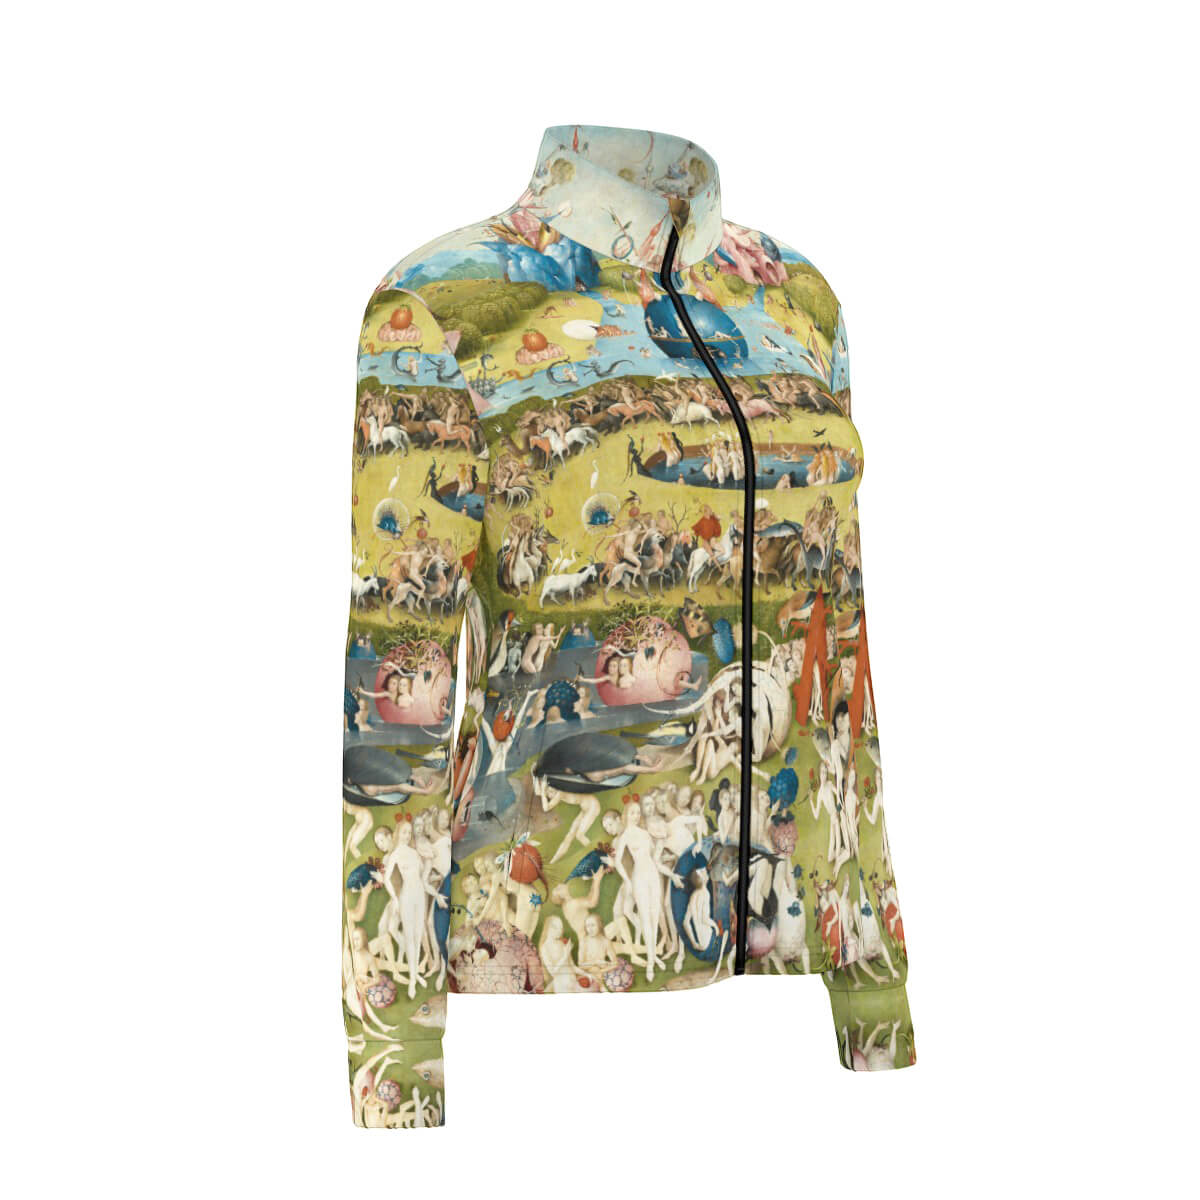 Unique Garden of Earthly Delights Outerwear